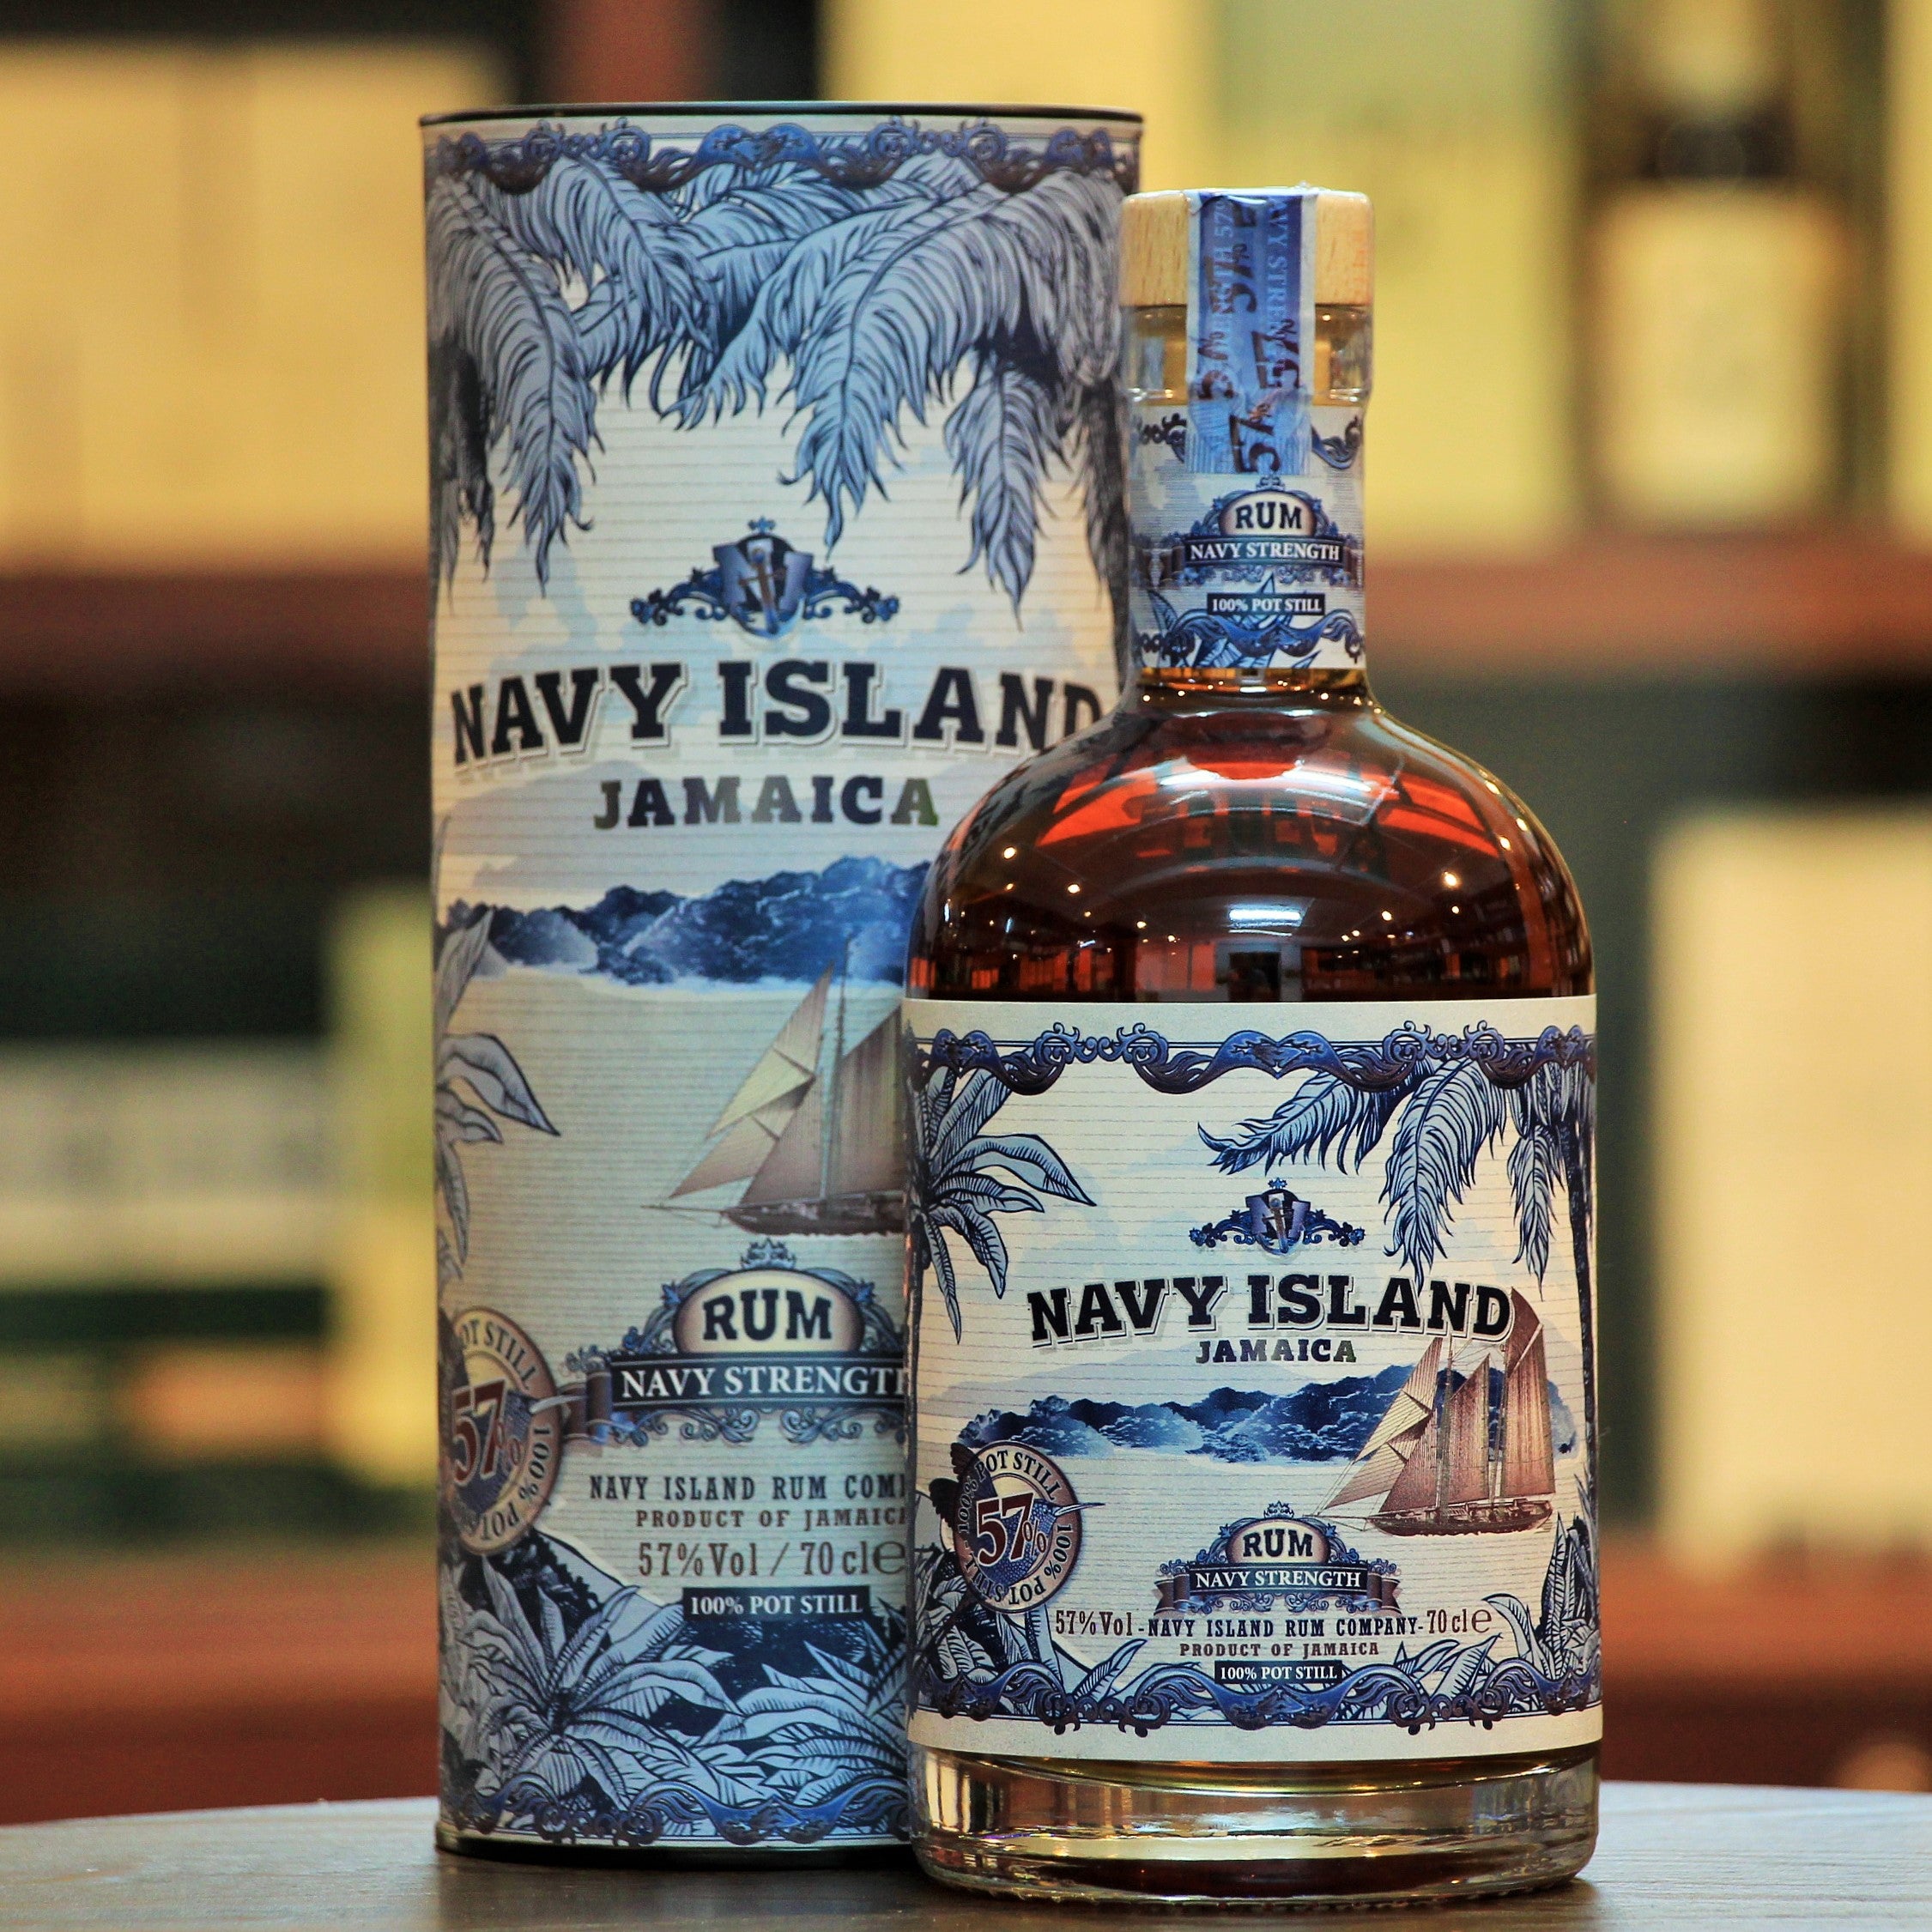 Navy Island Navy Strength Rum, A 100% pure Pot Still rum made from 11 carefully selected small batch distilled rums of various ages. IWSC Silver 2018, ISC Silver 2018 and 2019. 